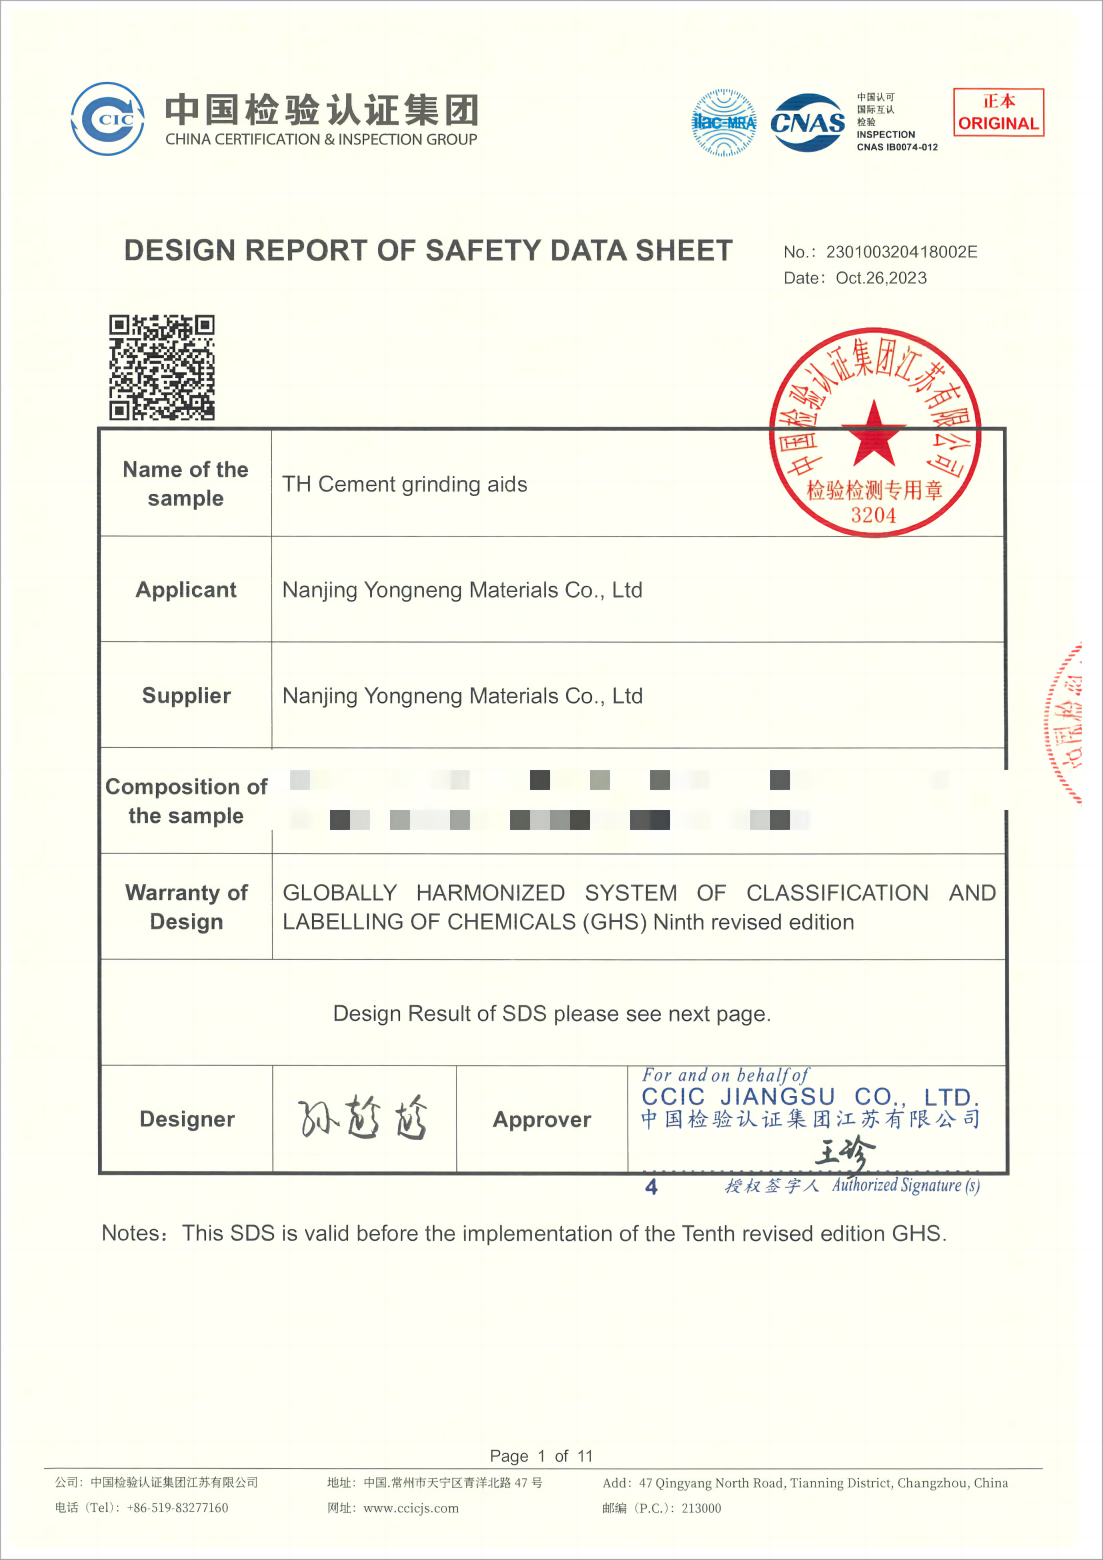 Design Report of Safety Data Sheet